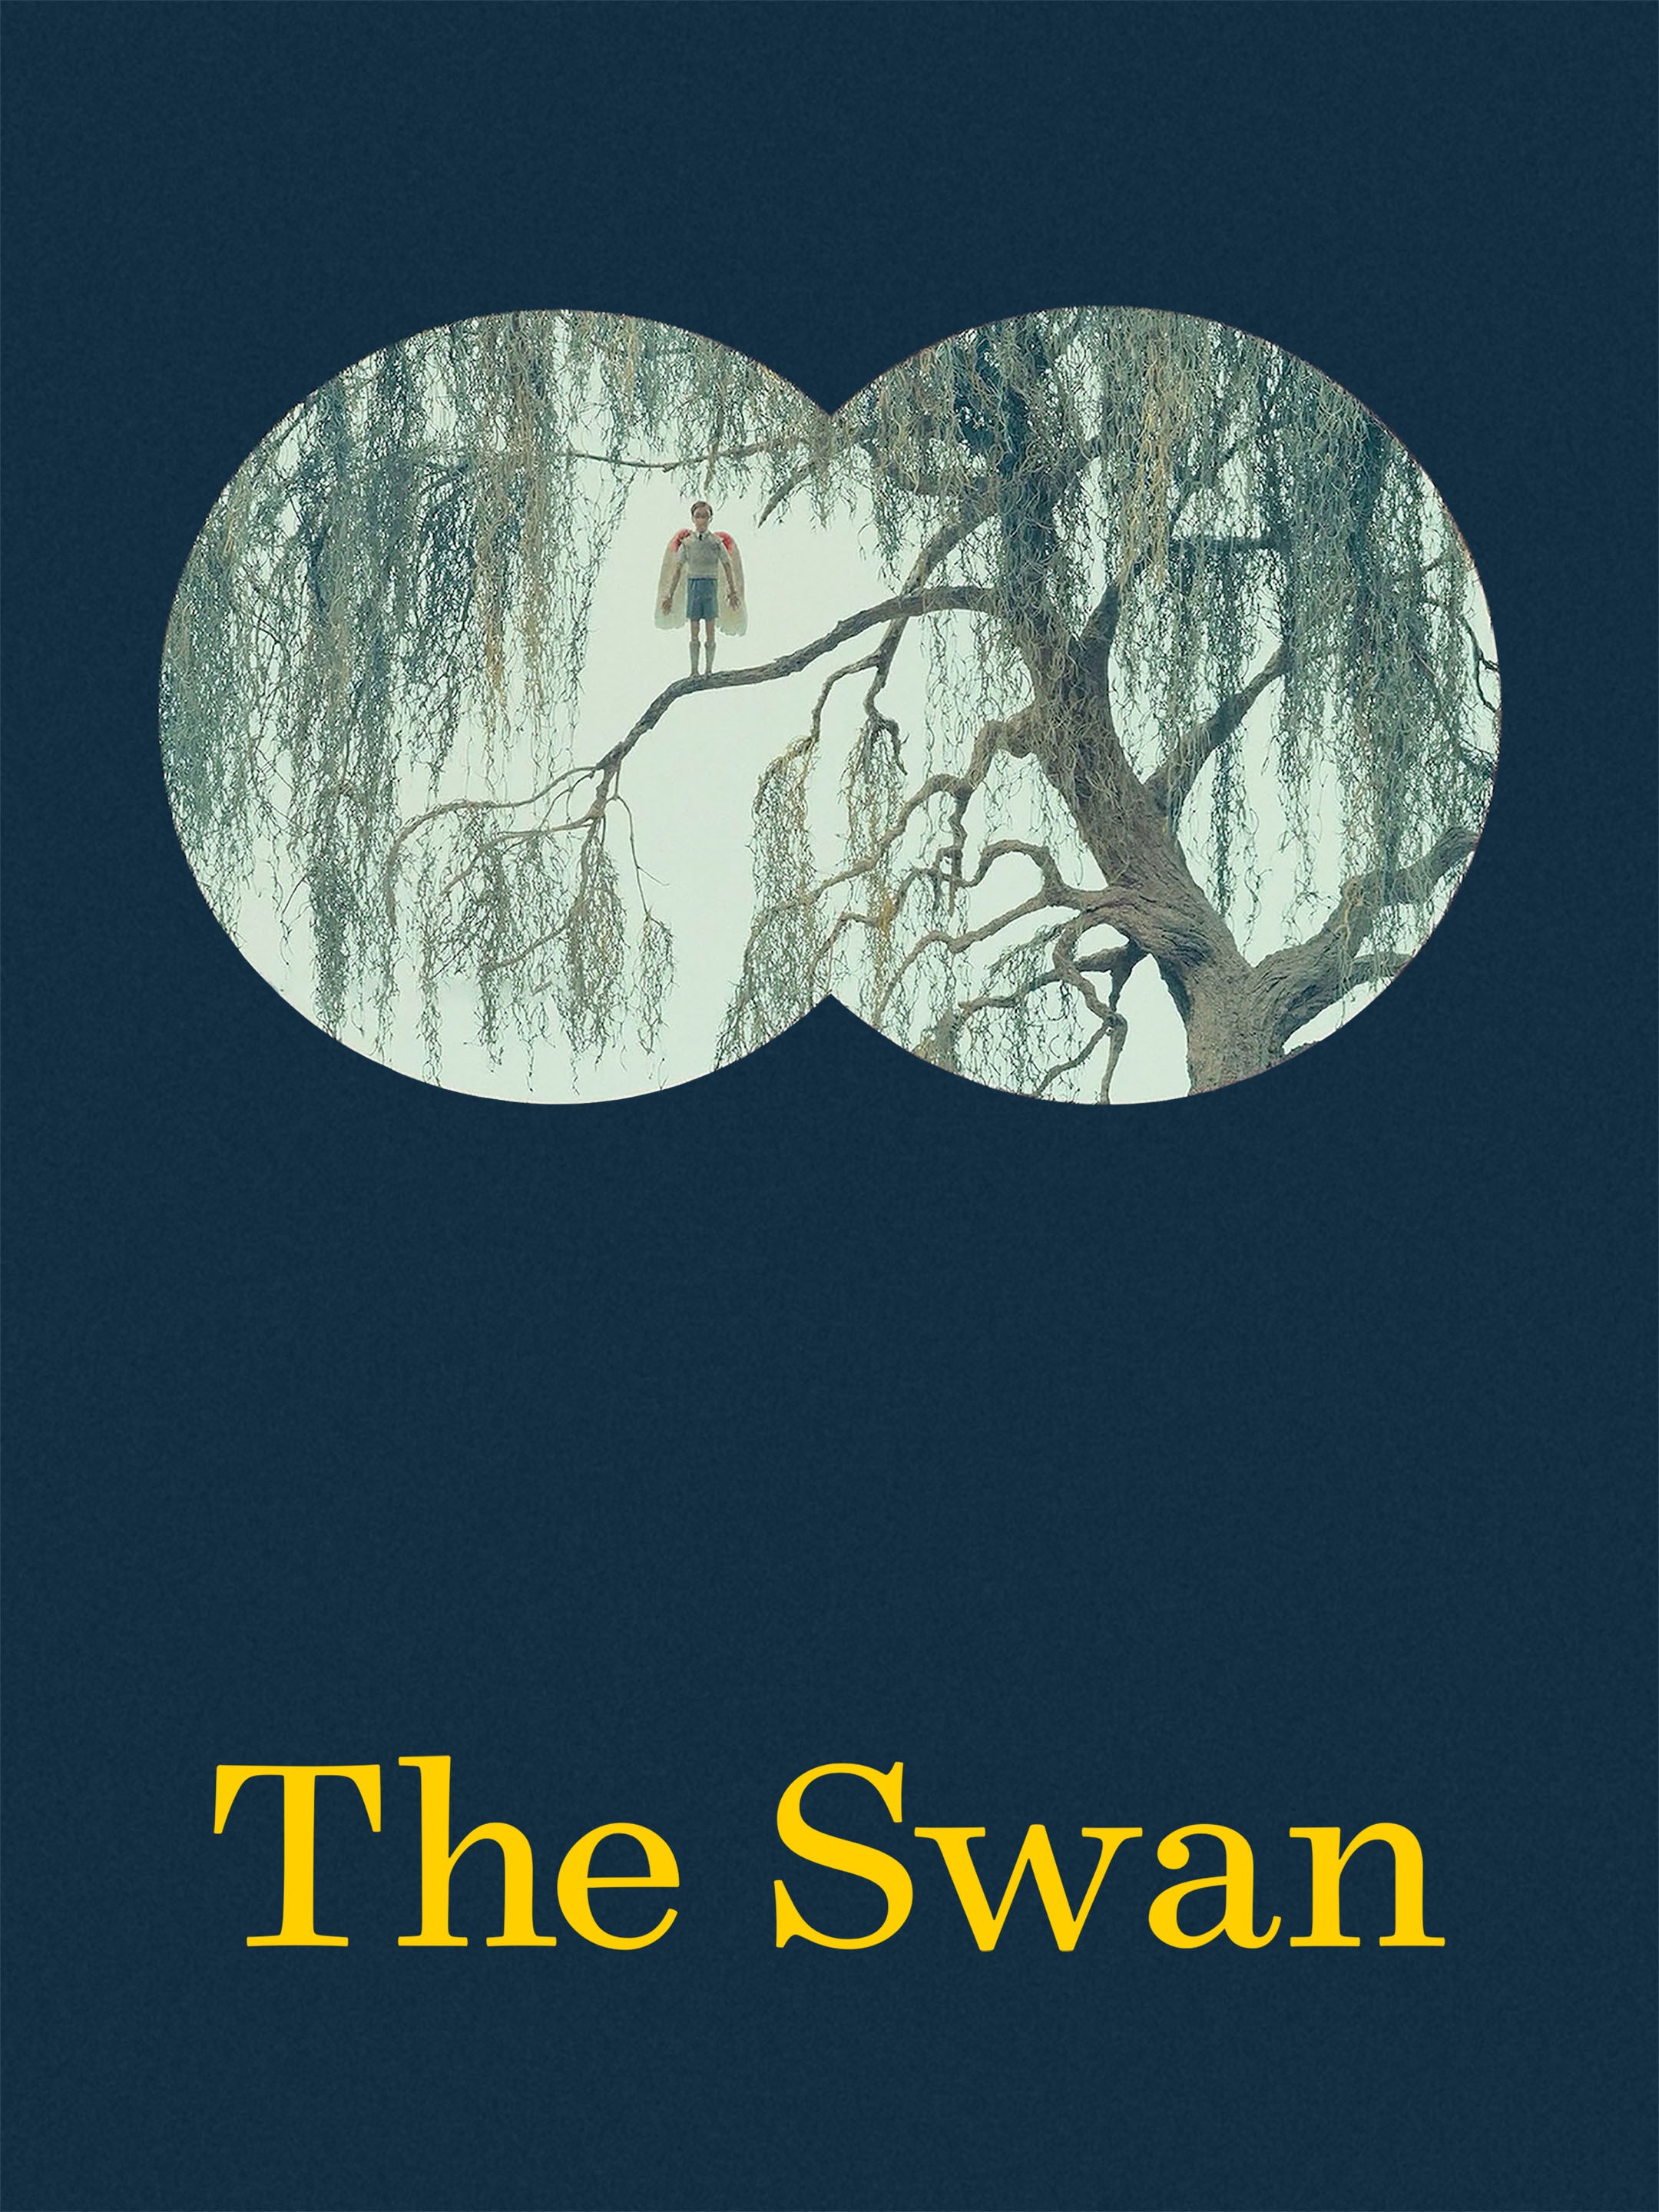 The Swan' Reality Series Was More Like a Horror Movie